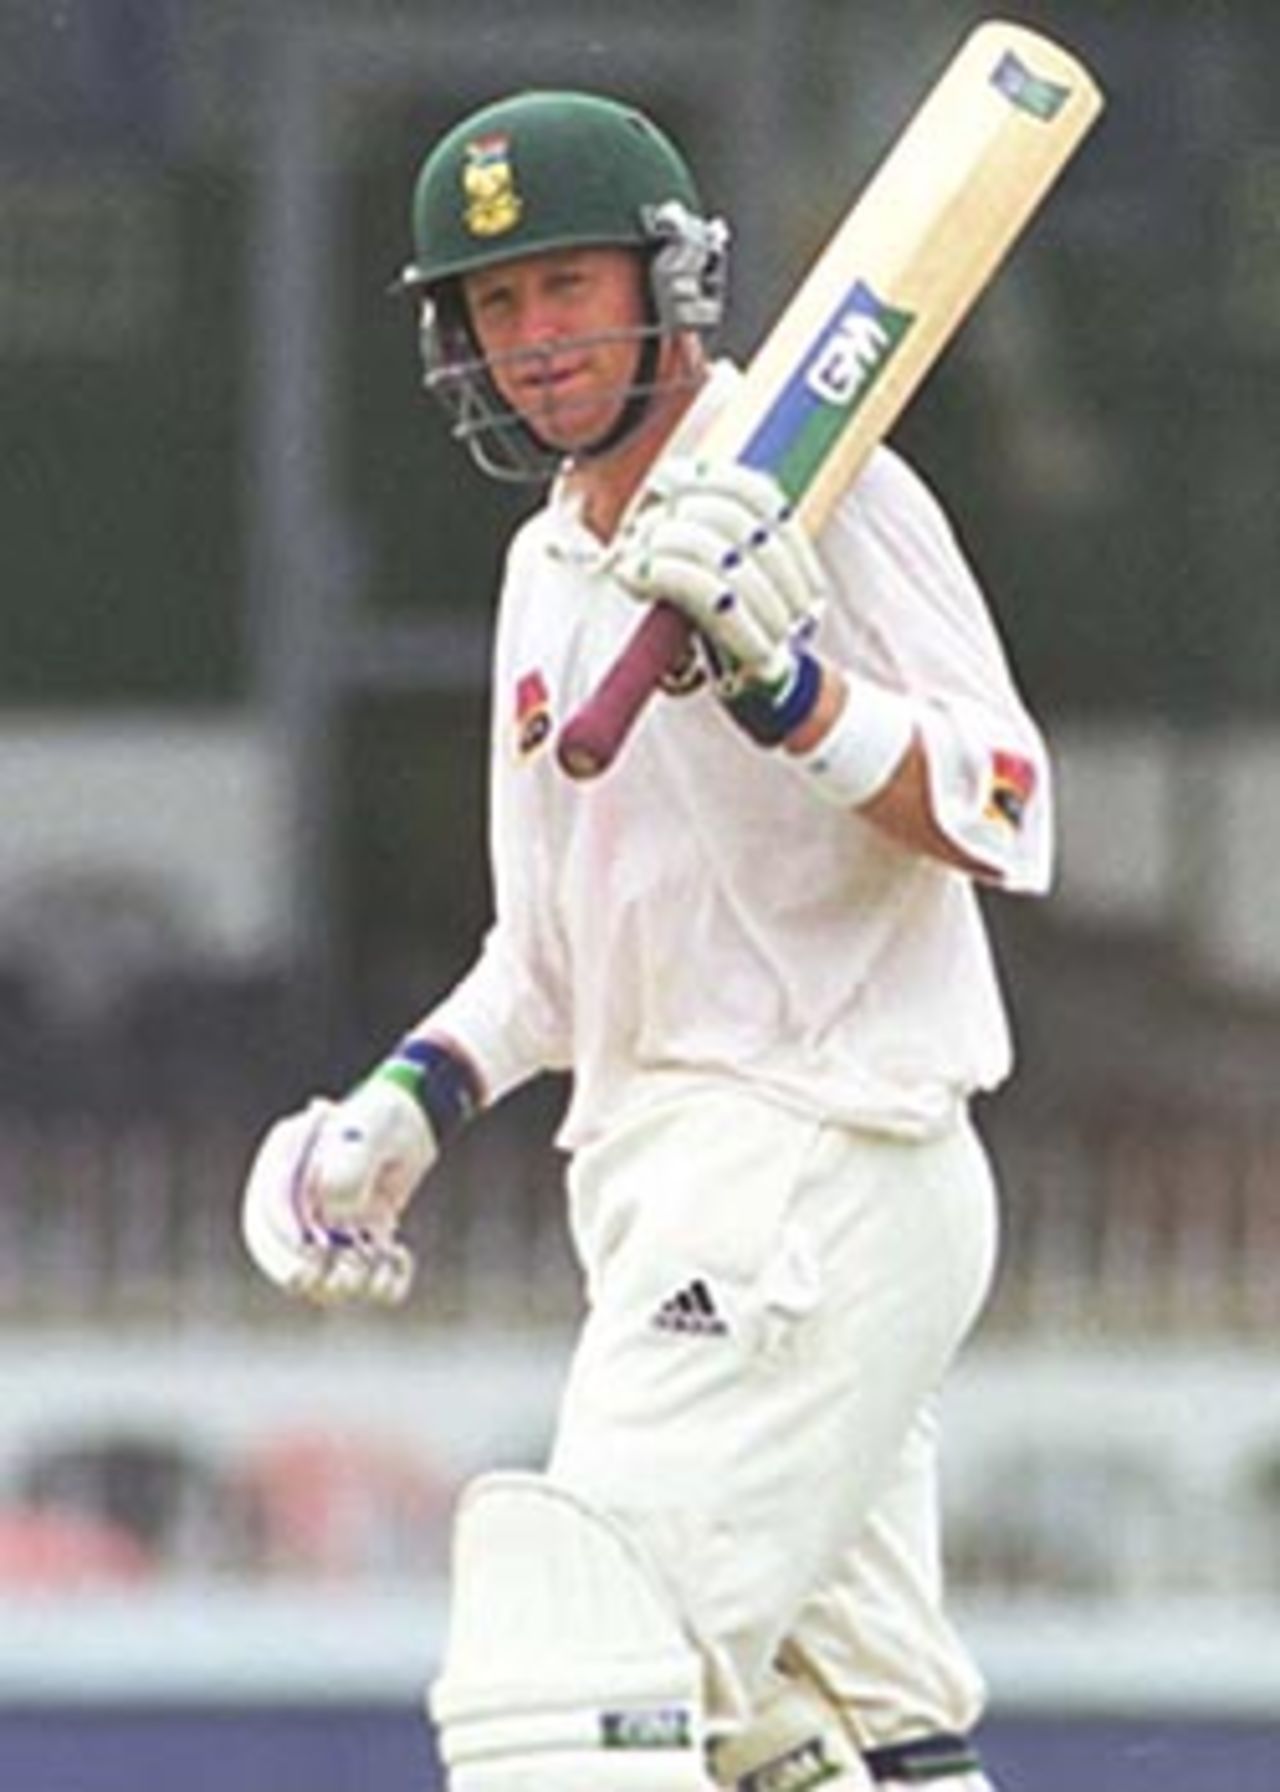 Rhodes acknowledges the crowd after reaching his fifty, South Africa in Sri Lanka, 2000/01, 3rd Test, Sri Lanka v South Africa, Sinhalese Sports Club Ground, Colombo, 06-10 August 2000 (Day 4).